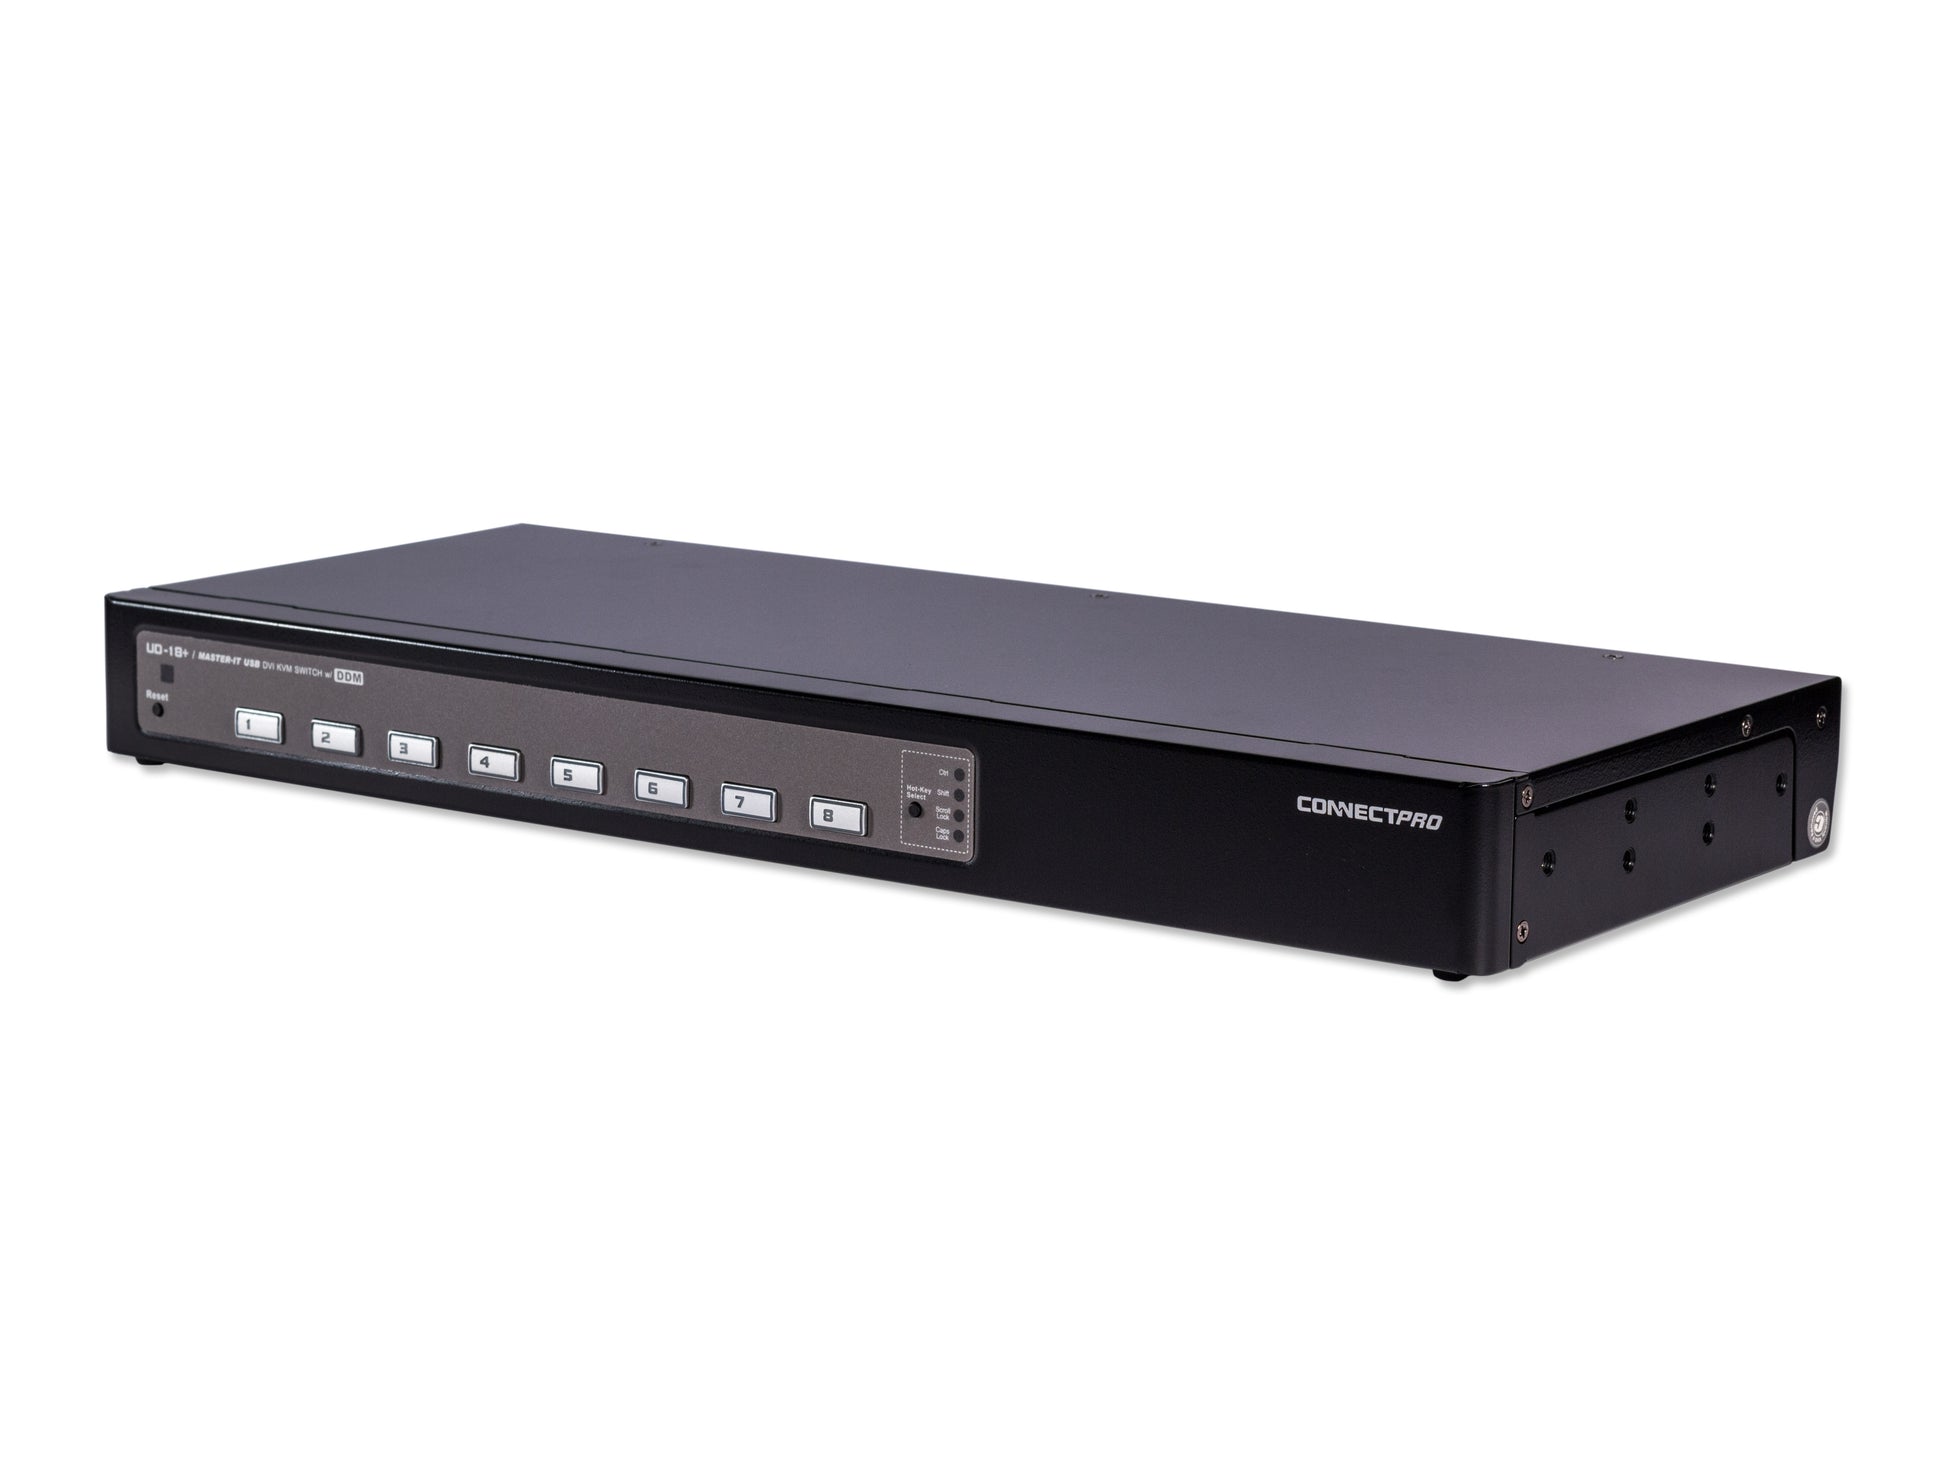 KVM Switch Buying Guide